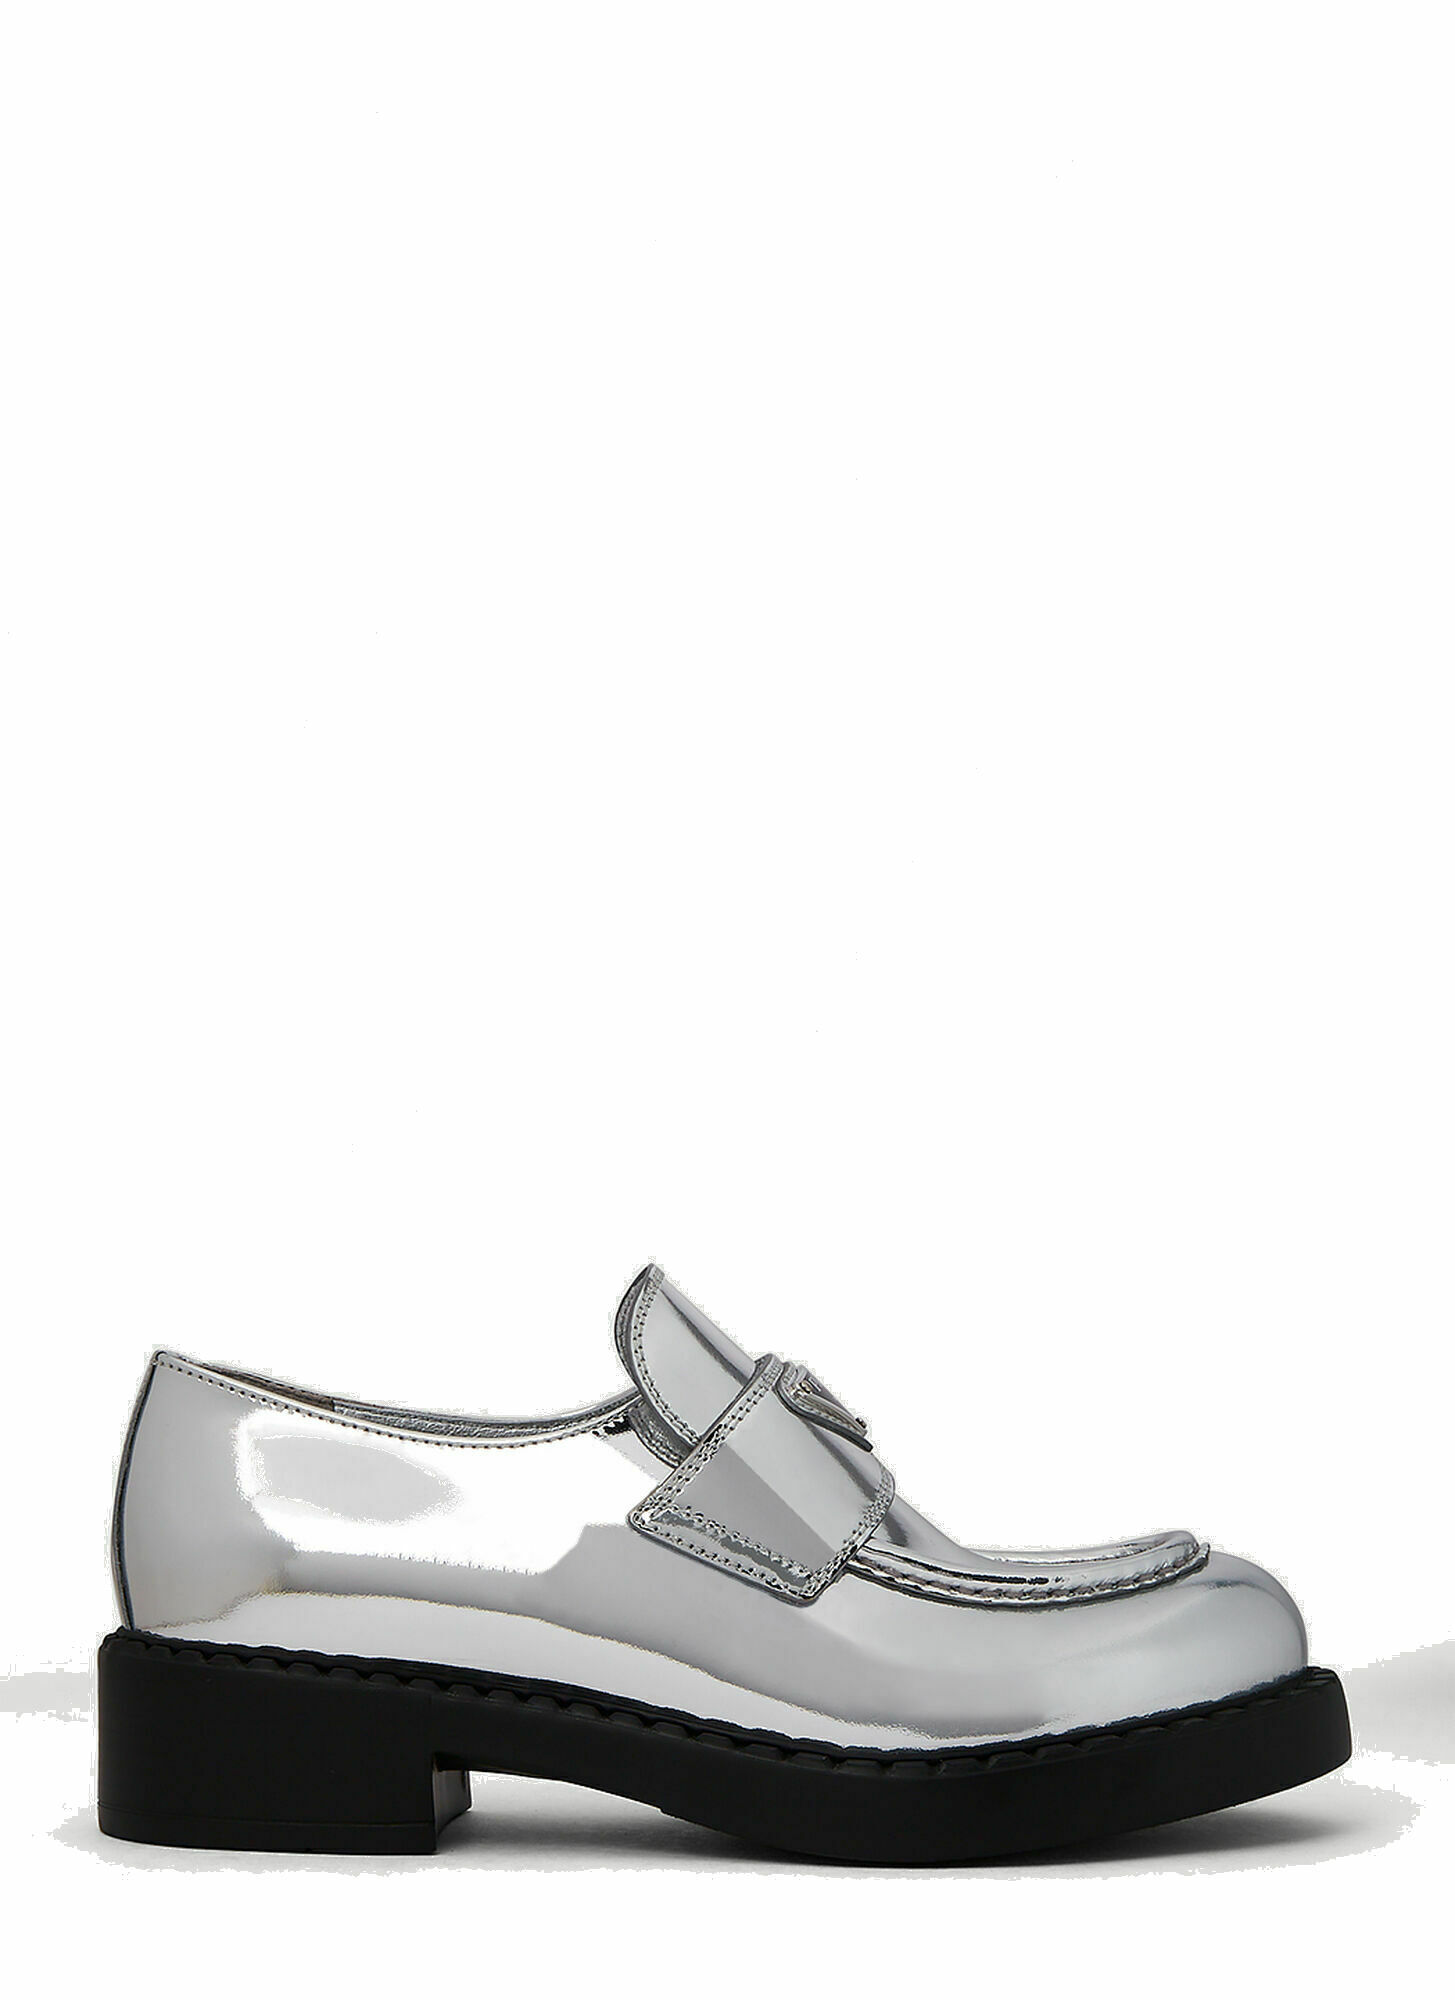 Photo: Mirrored Penny Loafers in Silver